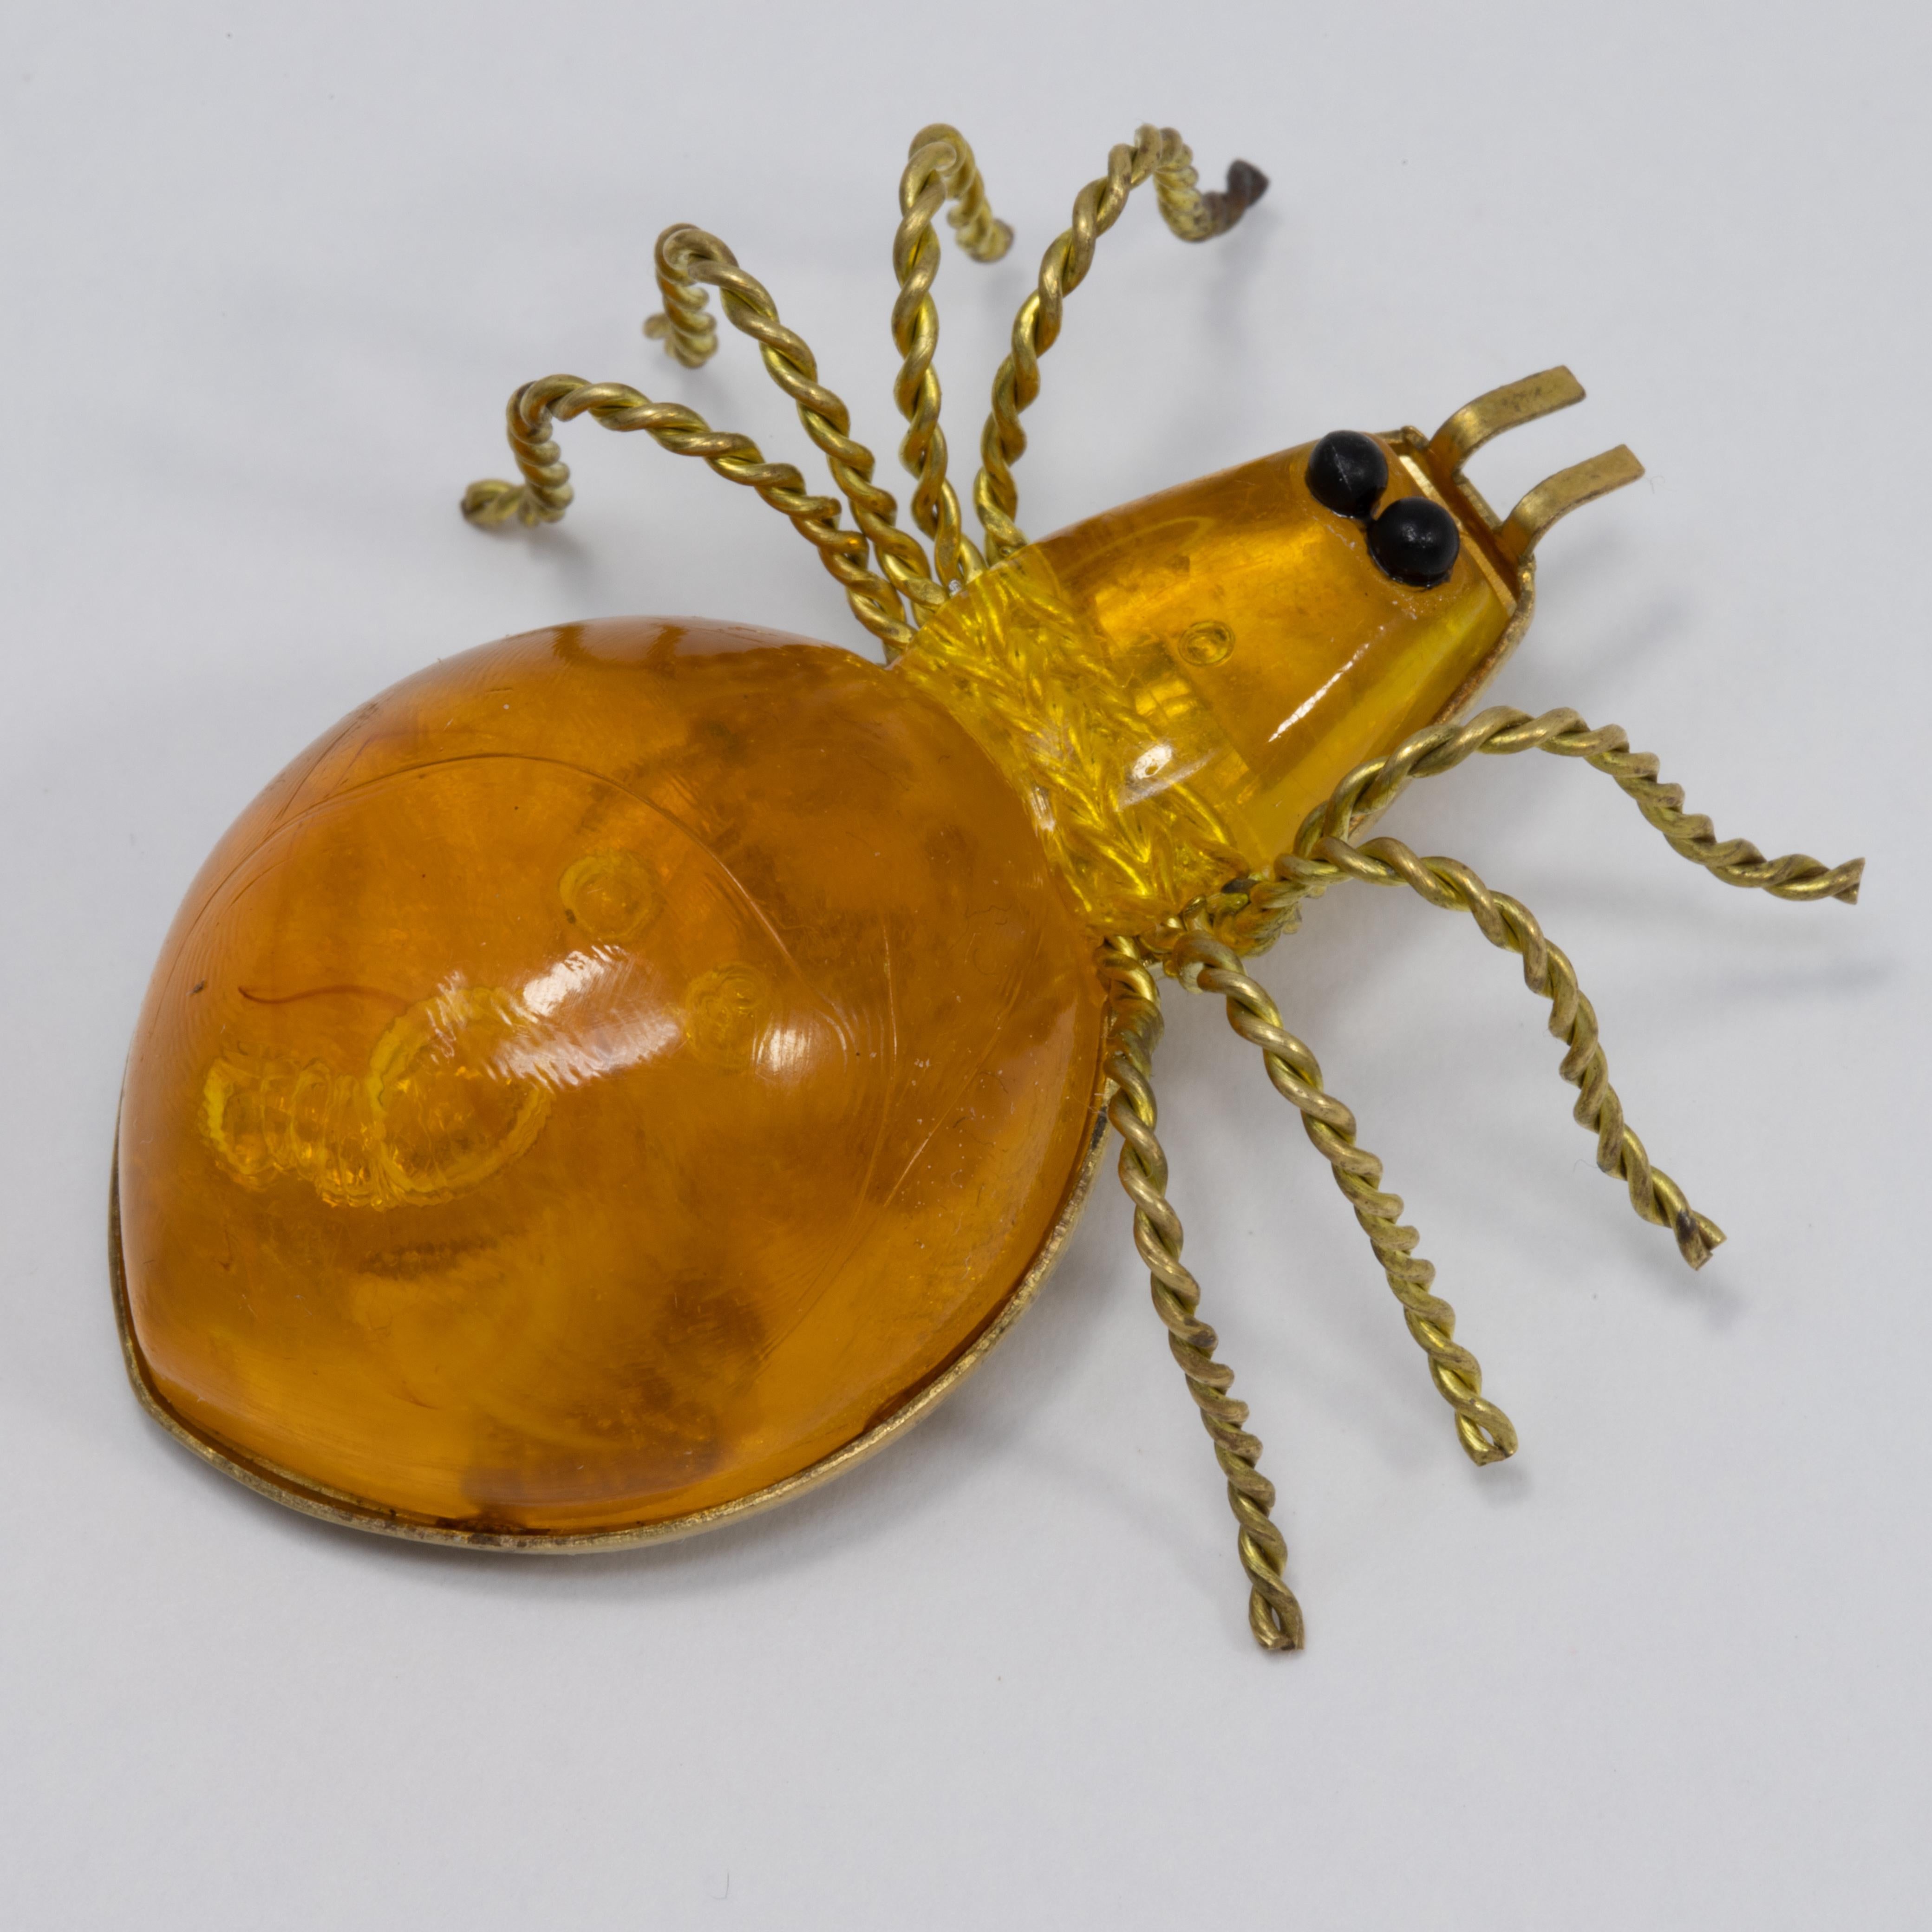 An exquisite spider brooch. This Russian pin is the perfect accessory, featuring an amber body set on a goldtone setting and accented with two round black eyes. The twisted wire legs add a quirky and artistic touch.

Hallmarks: 03P,